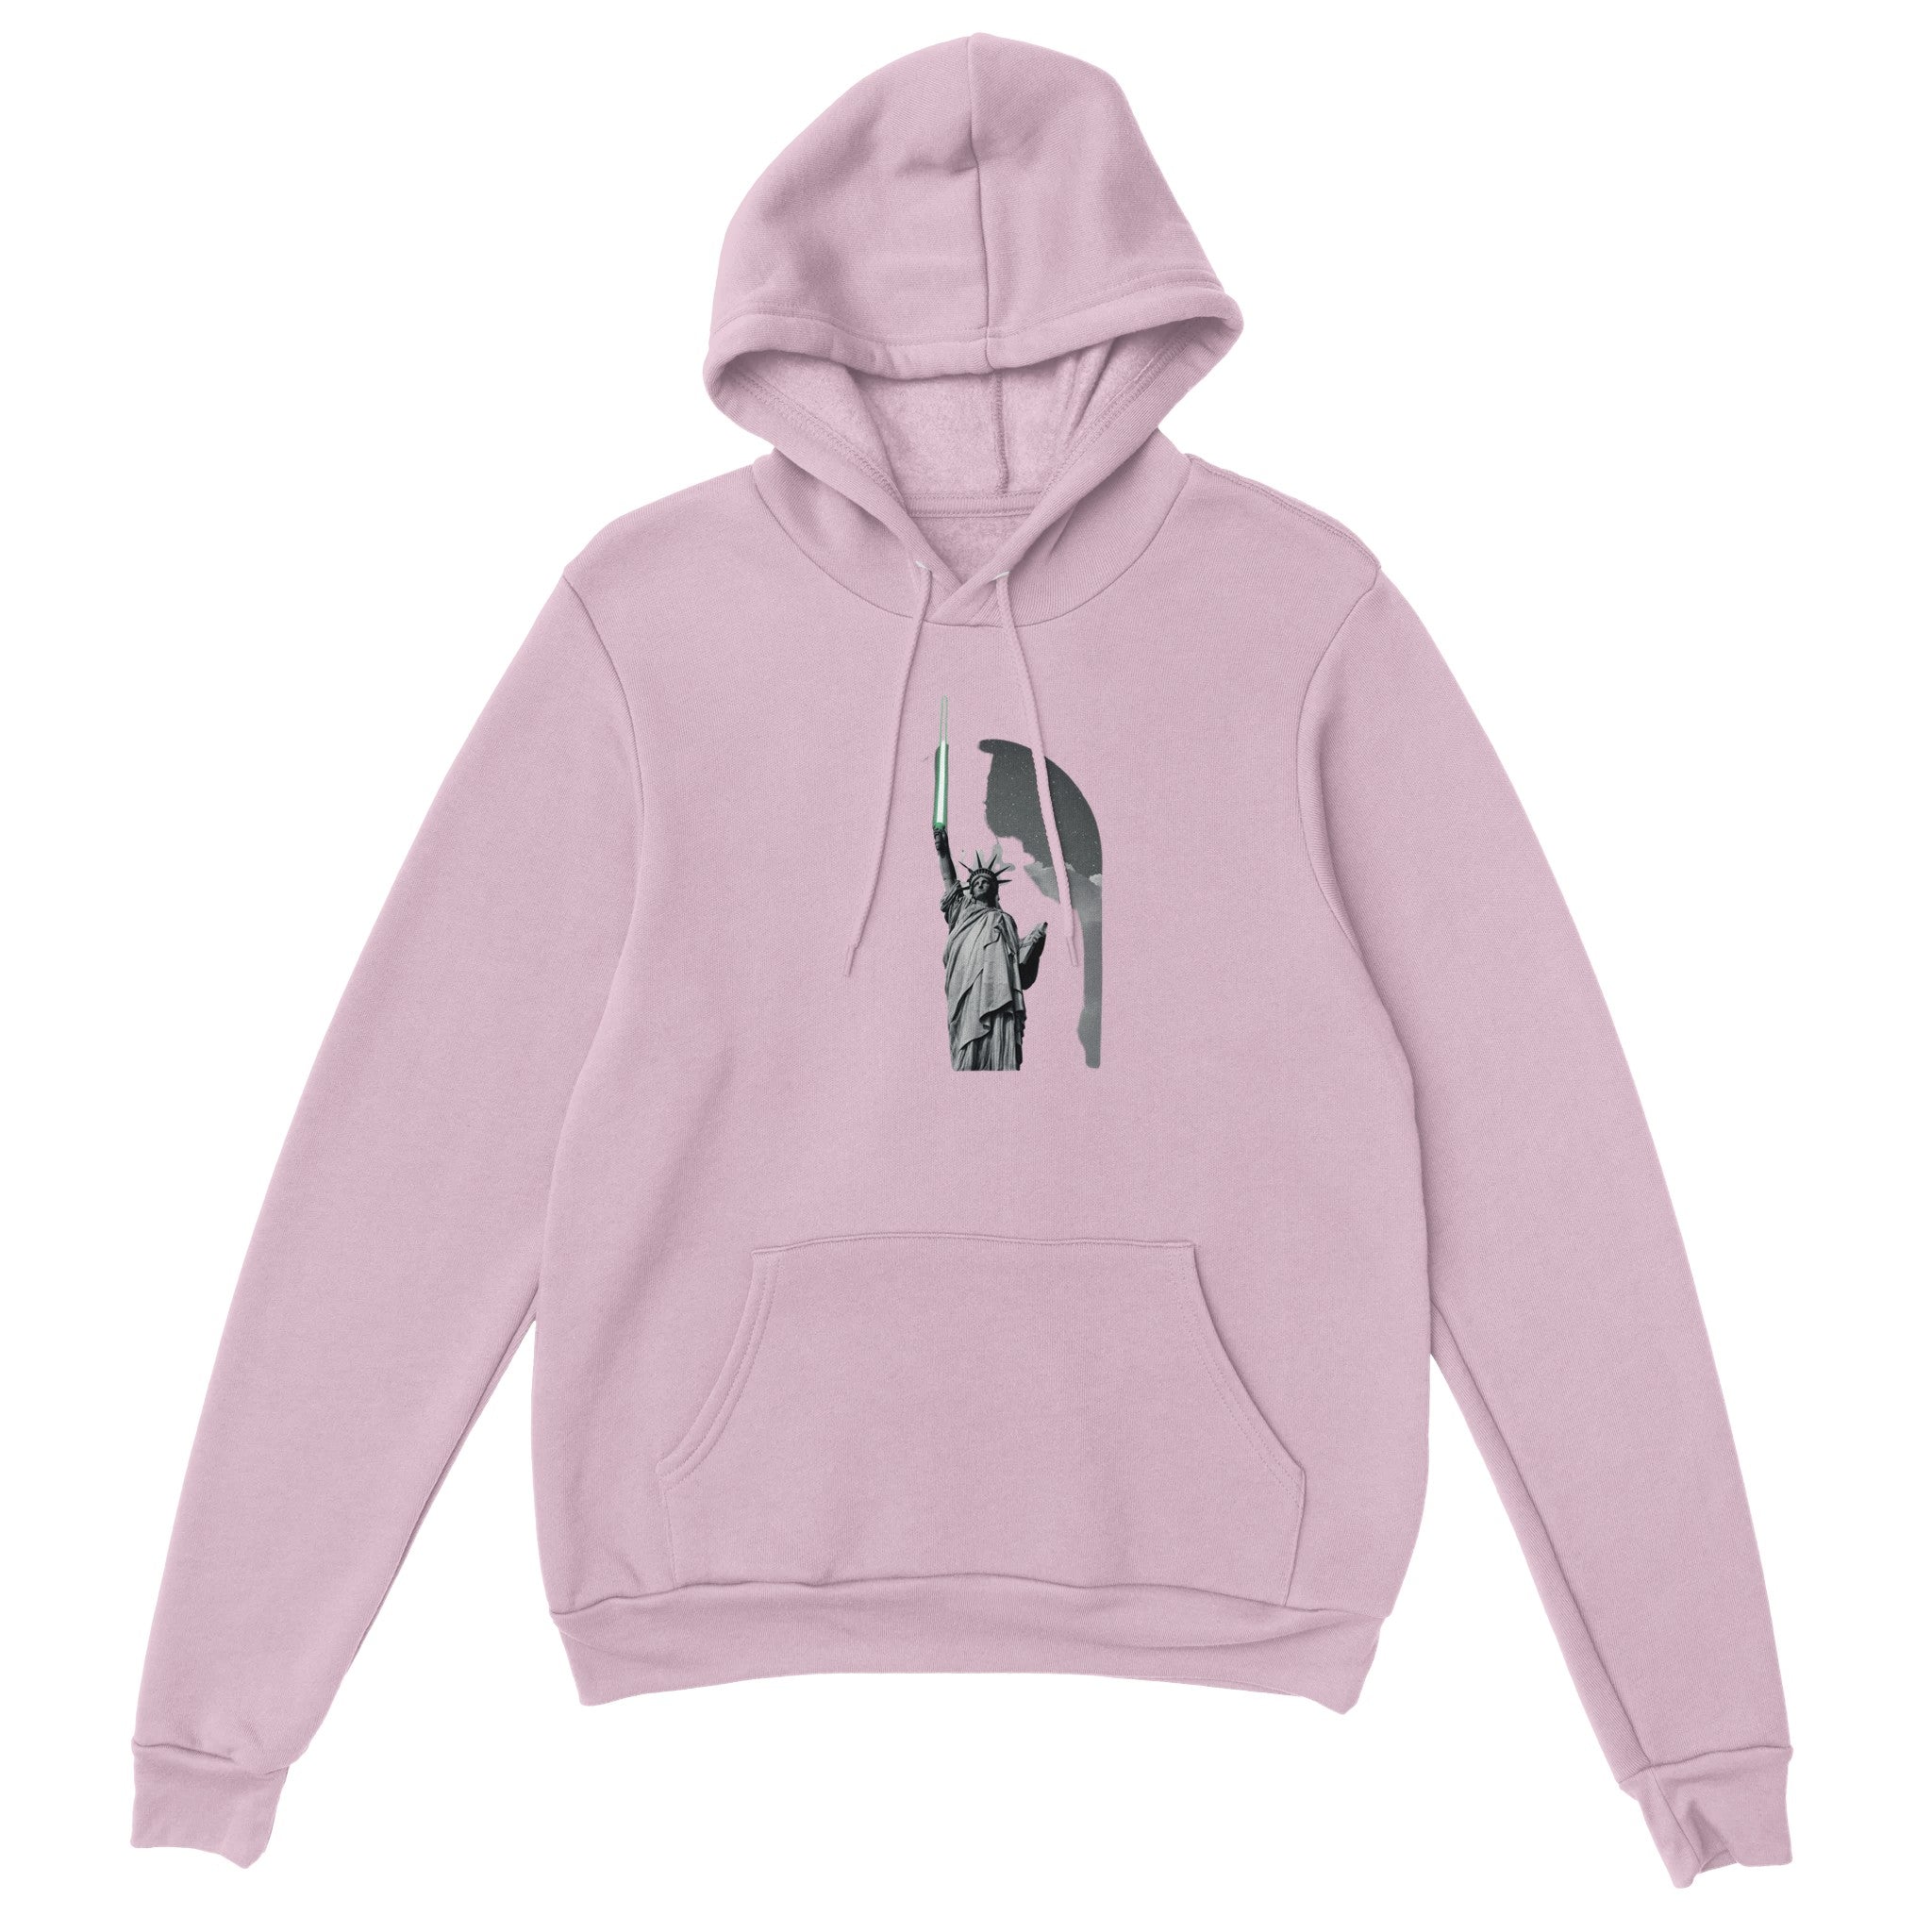 Statue Of The Force Pullover Hoodie - Optimalprint